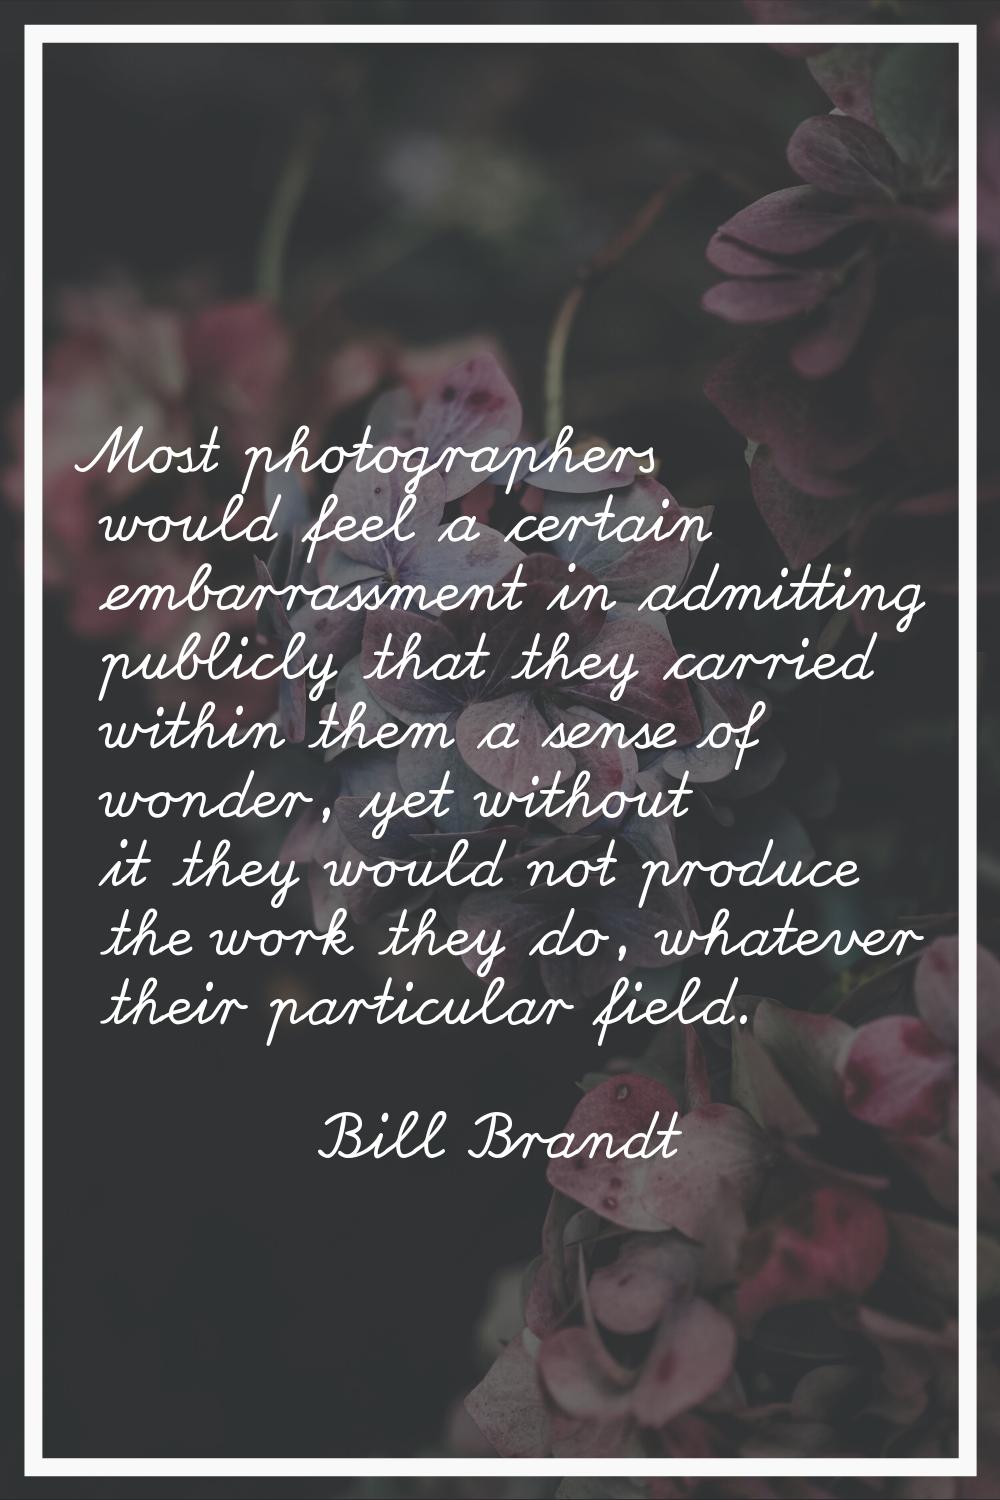 Most photographers would feel a certain embarrassment in admitting publicly that they carried withi